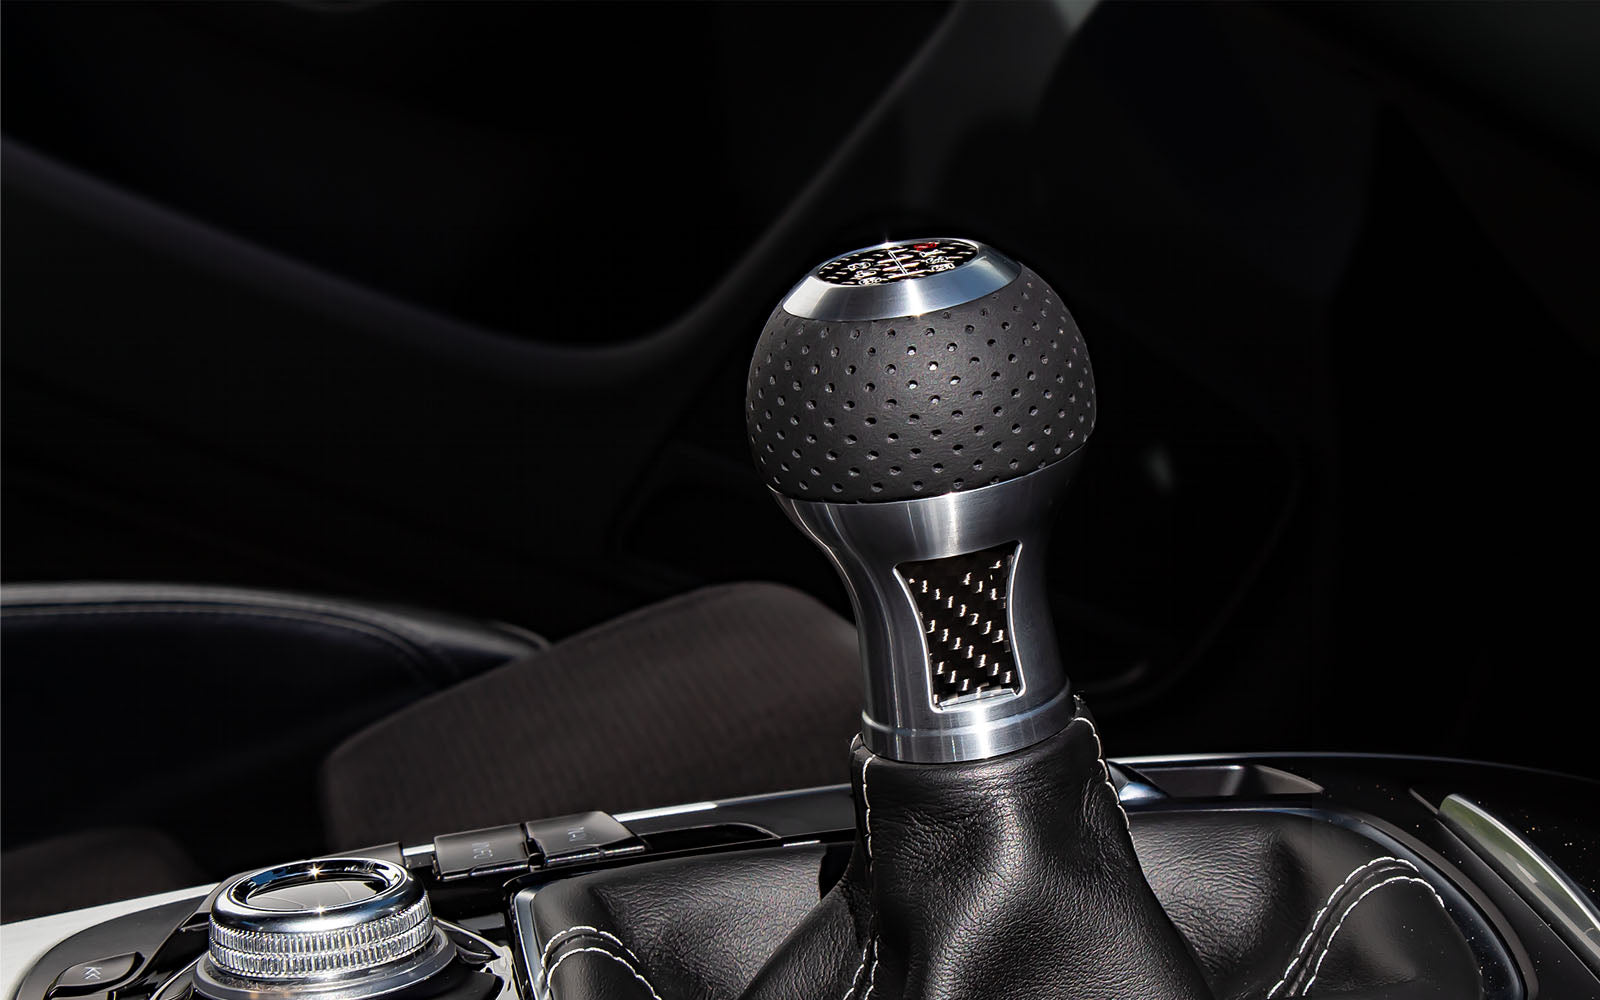  Meet your new Shifter! – Sportshifters